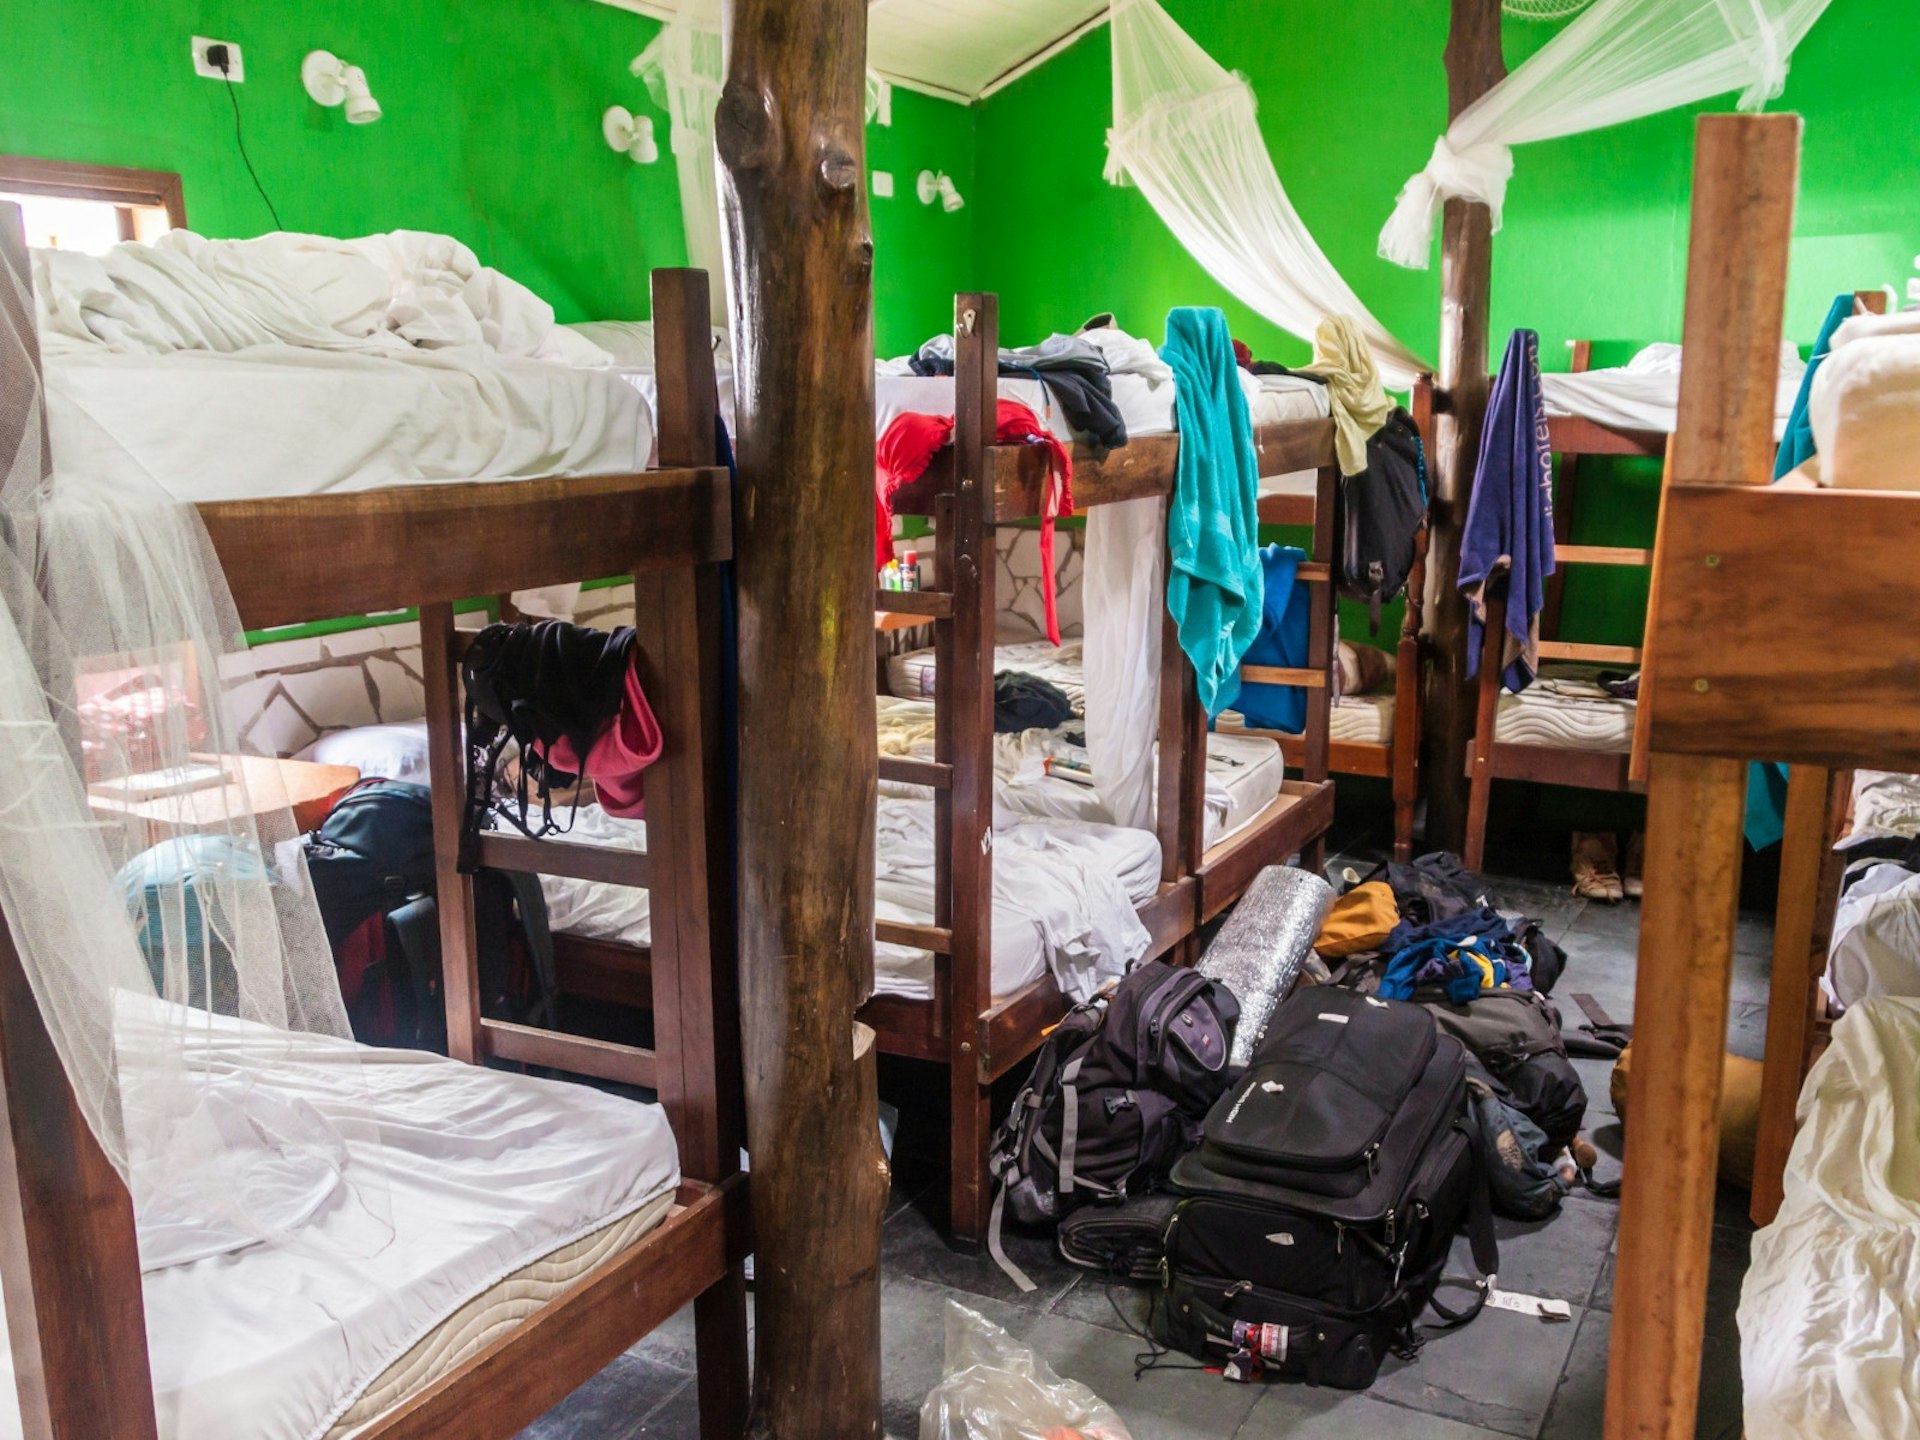 A messy hostel dorm room with suitcases and backpacks on the floor 